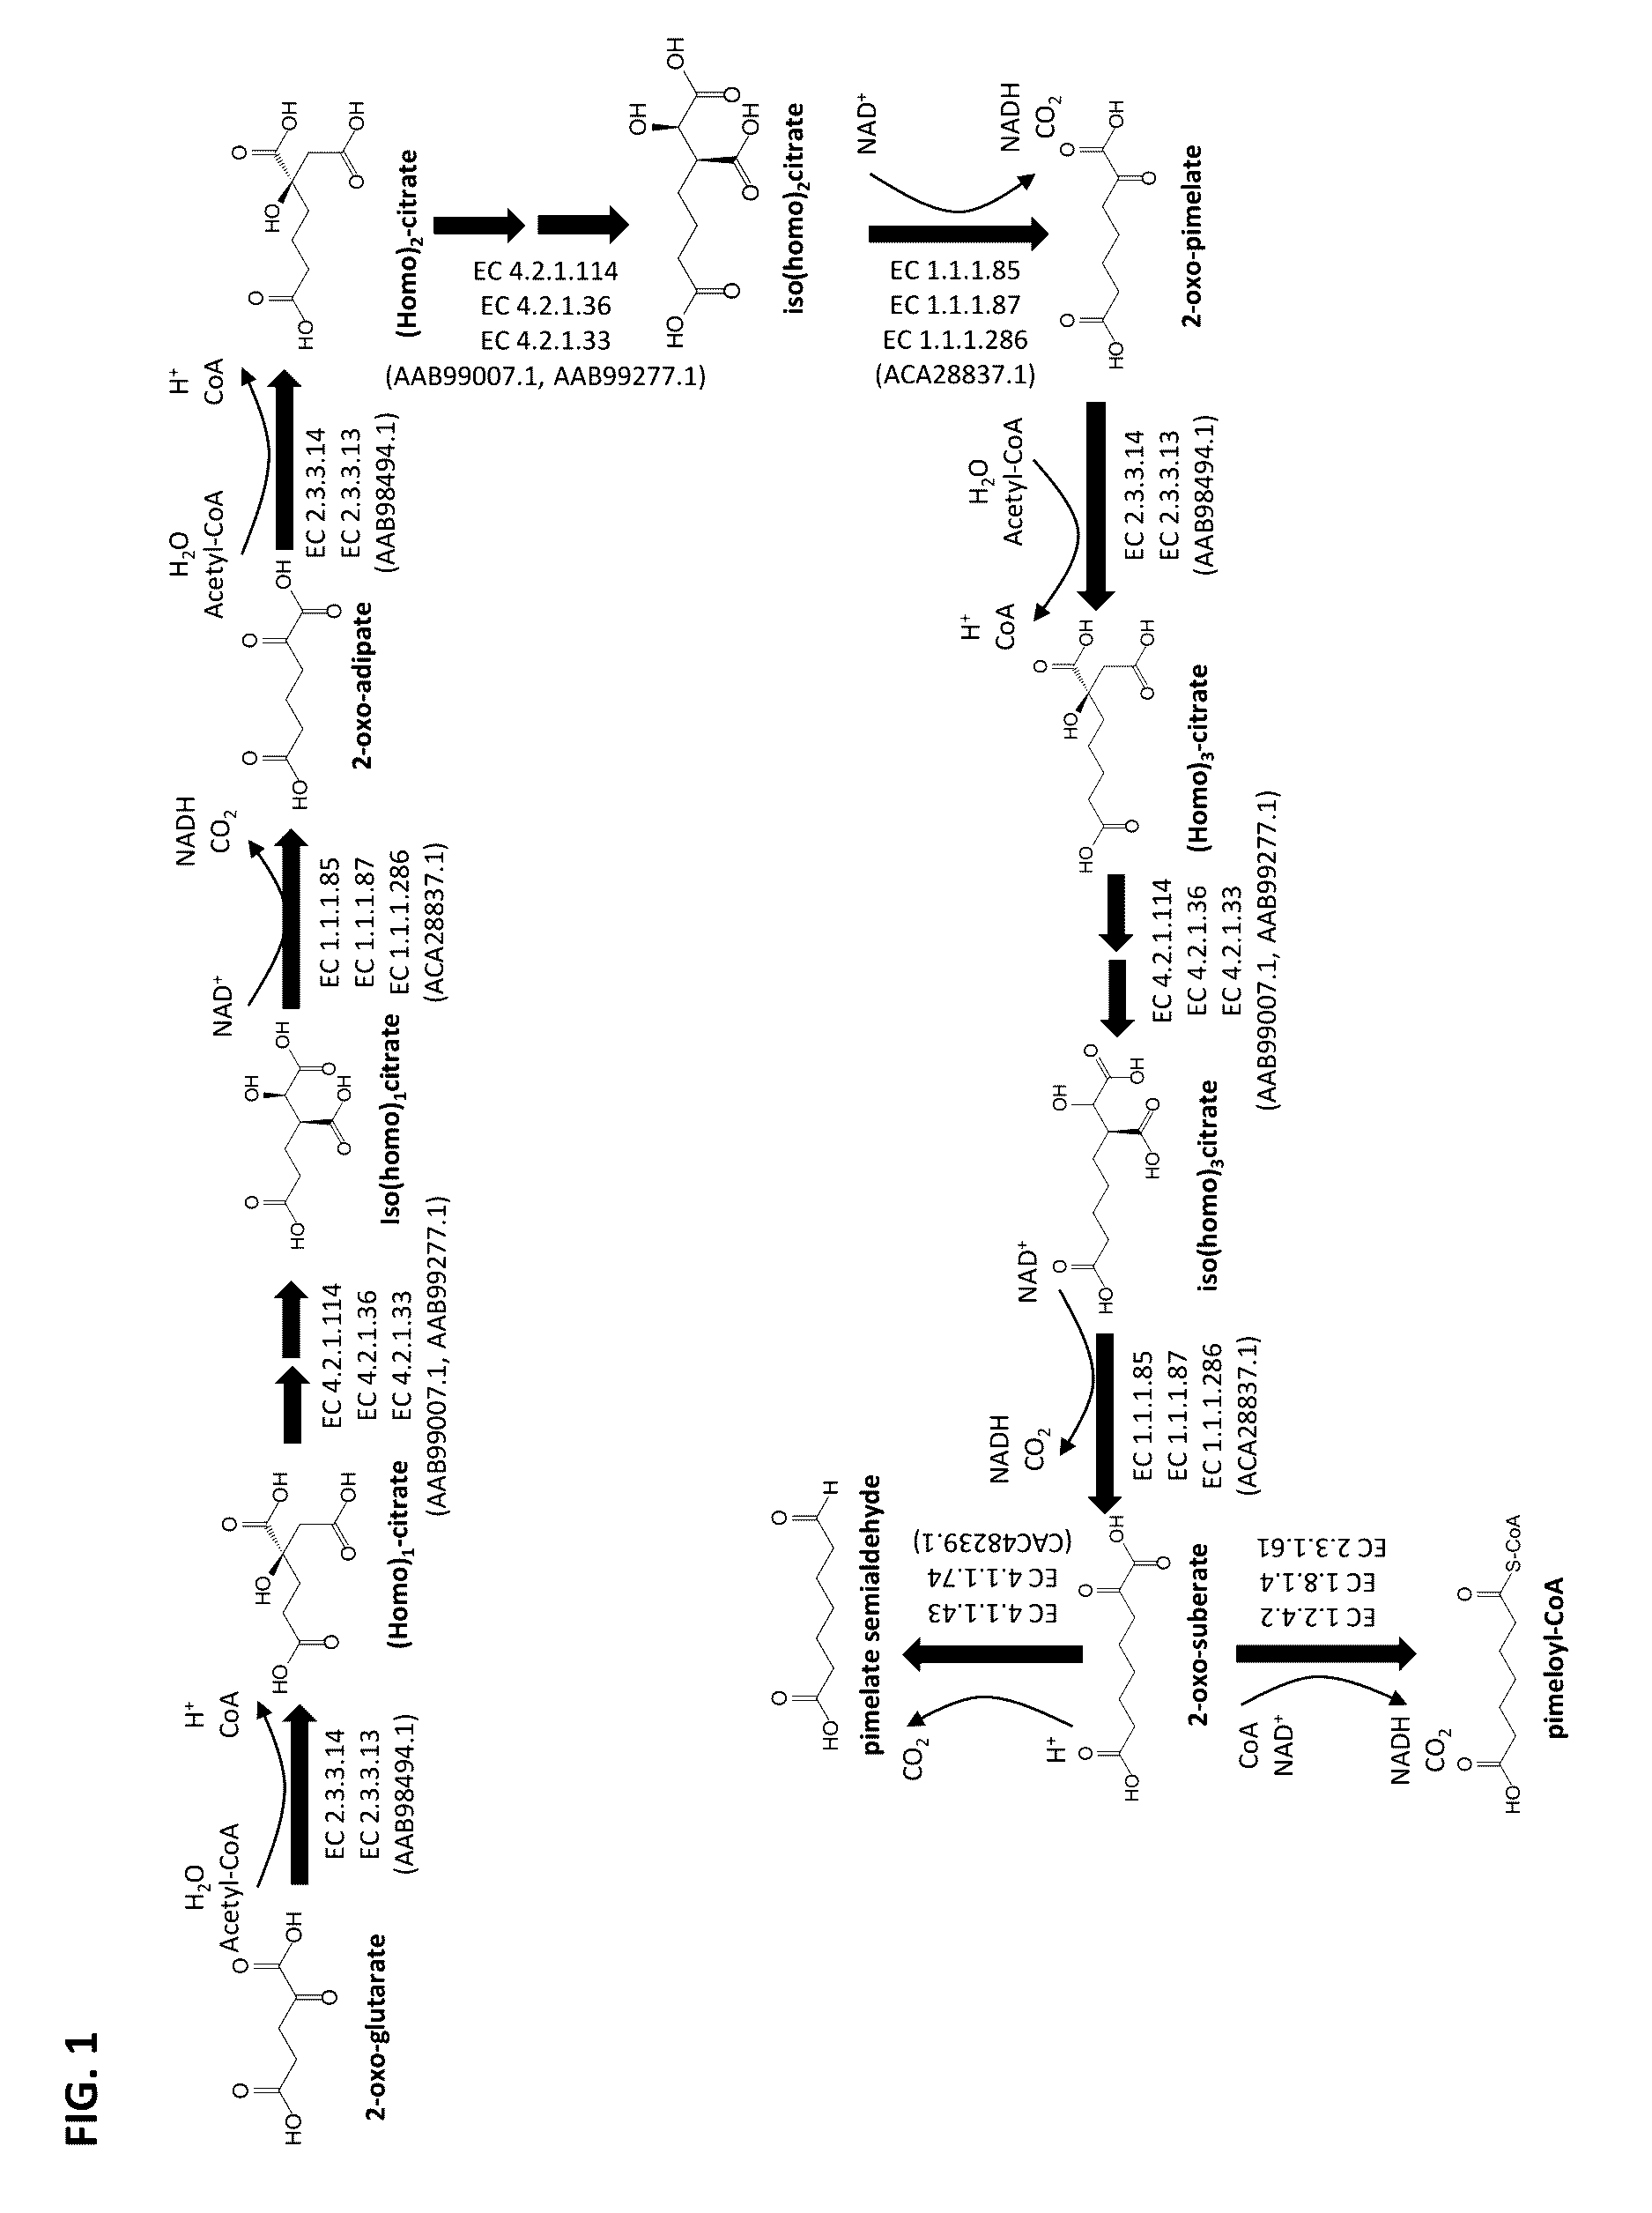 Methods of producing 7-carbon chemicals via c1 carbon chain elongation associated with coenzyme B synthesis